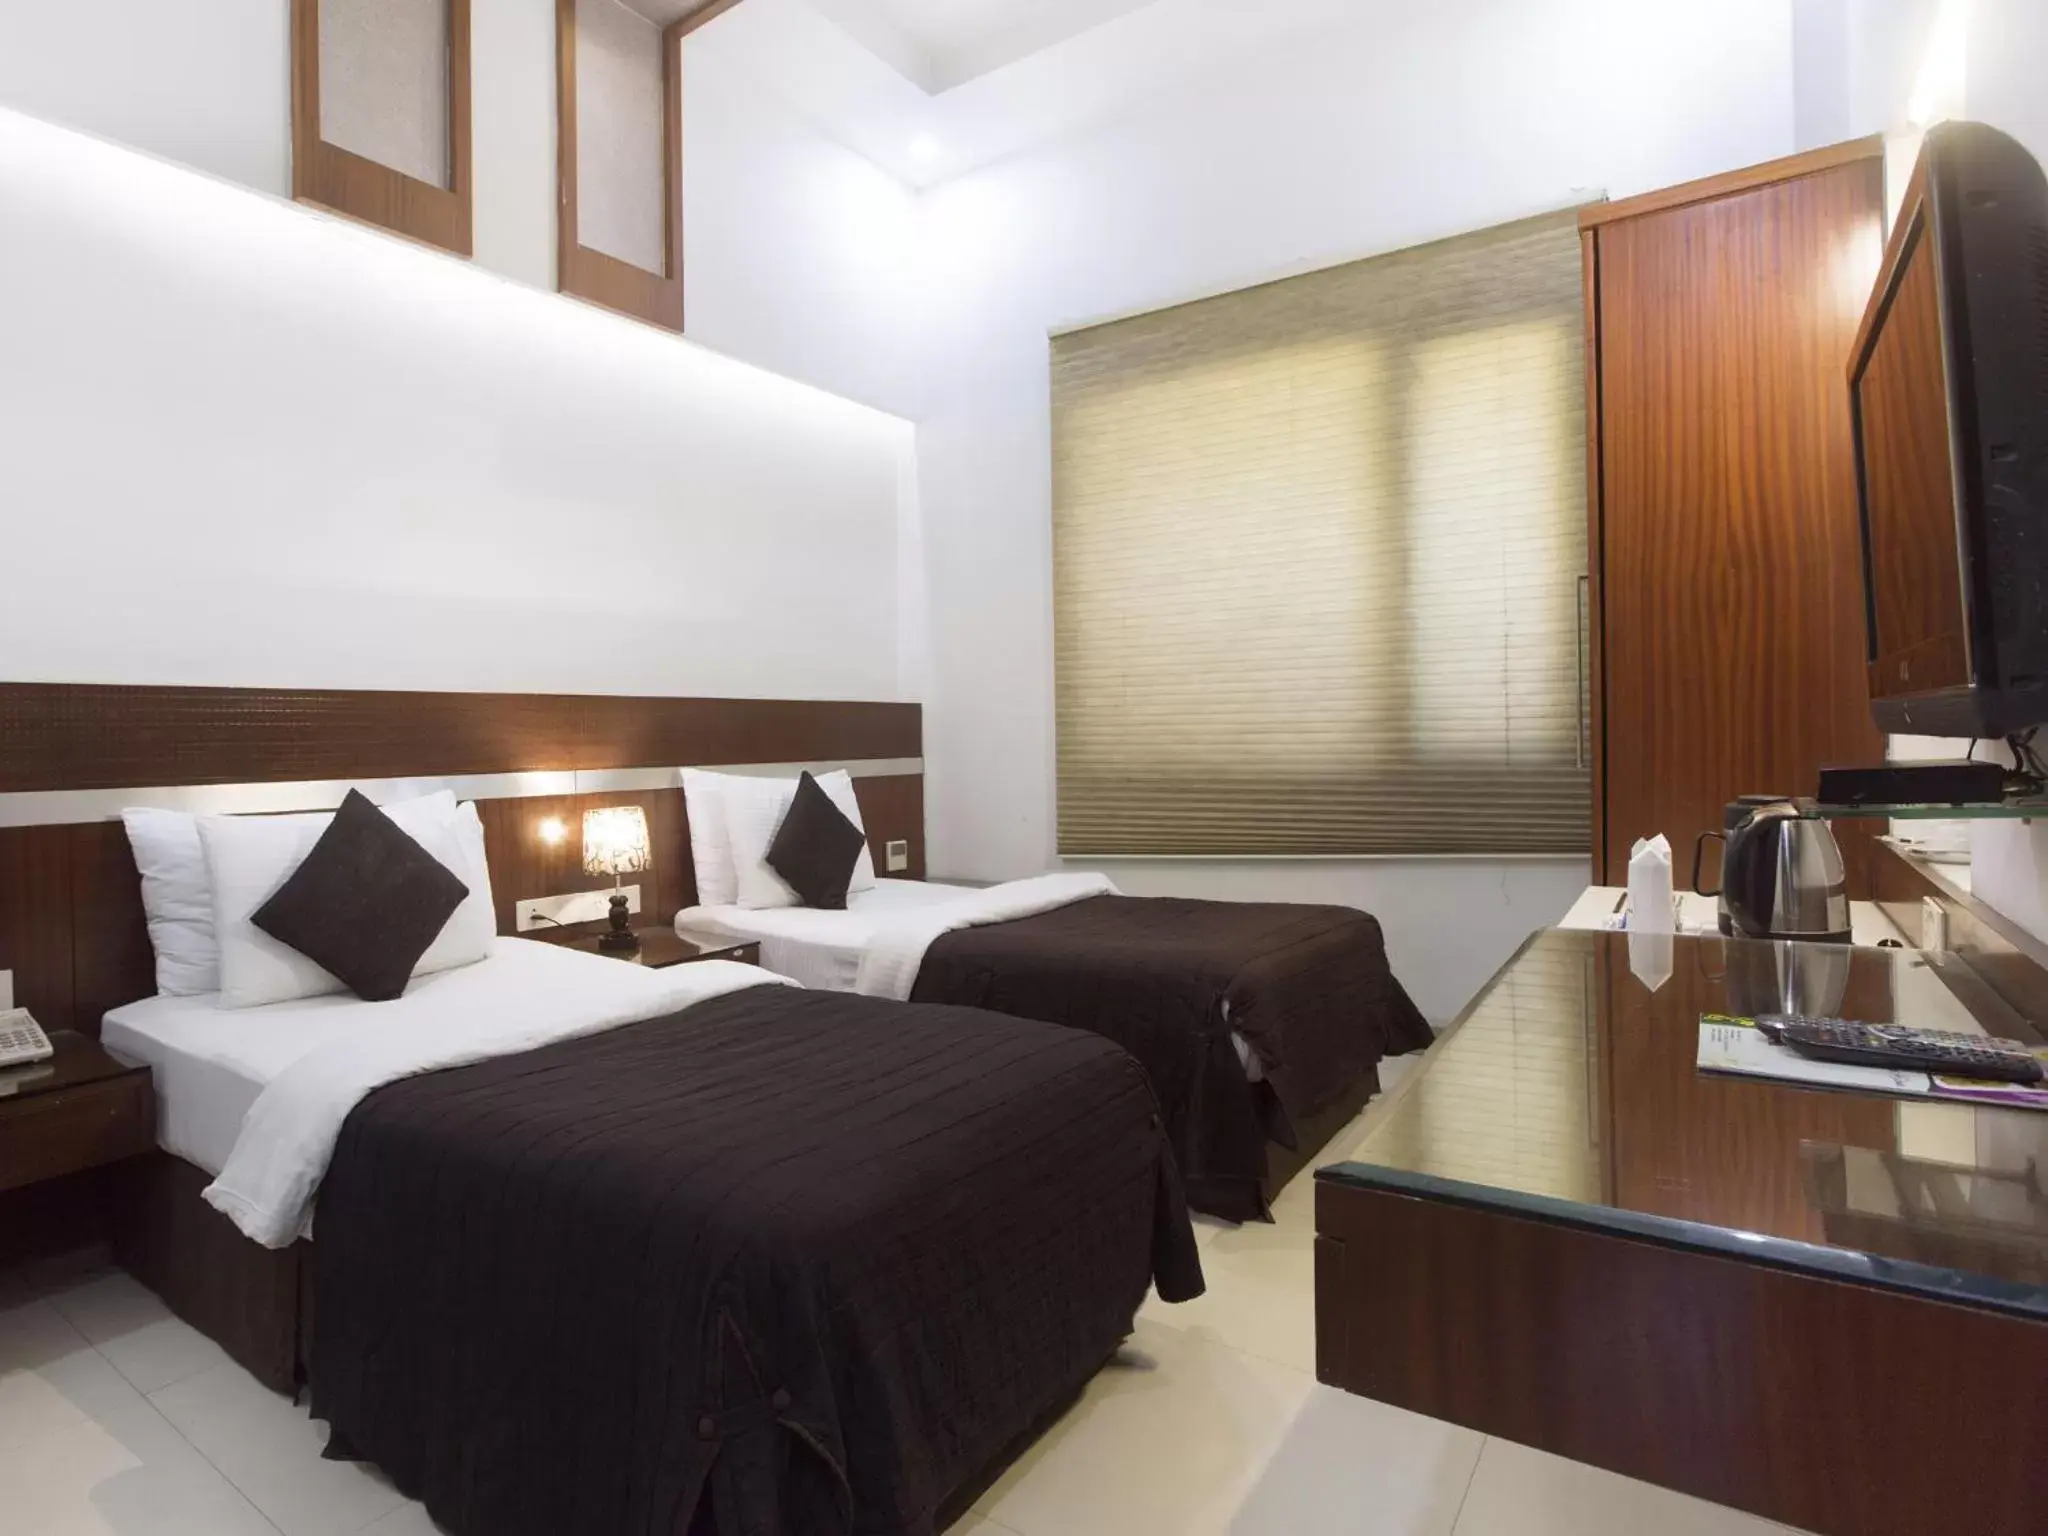 Bed, Room Photo in Hotel Krishna - By RCG Hotels